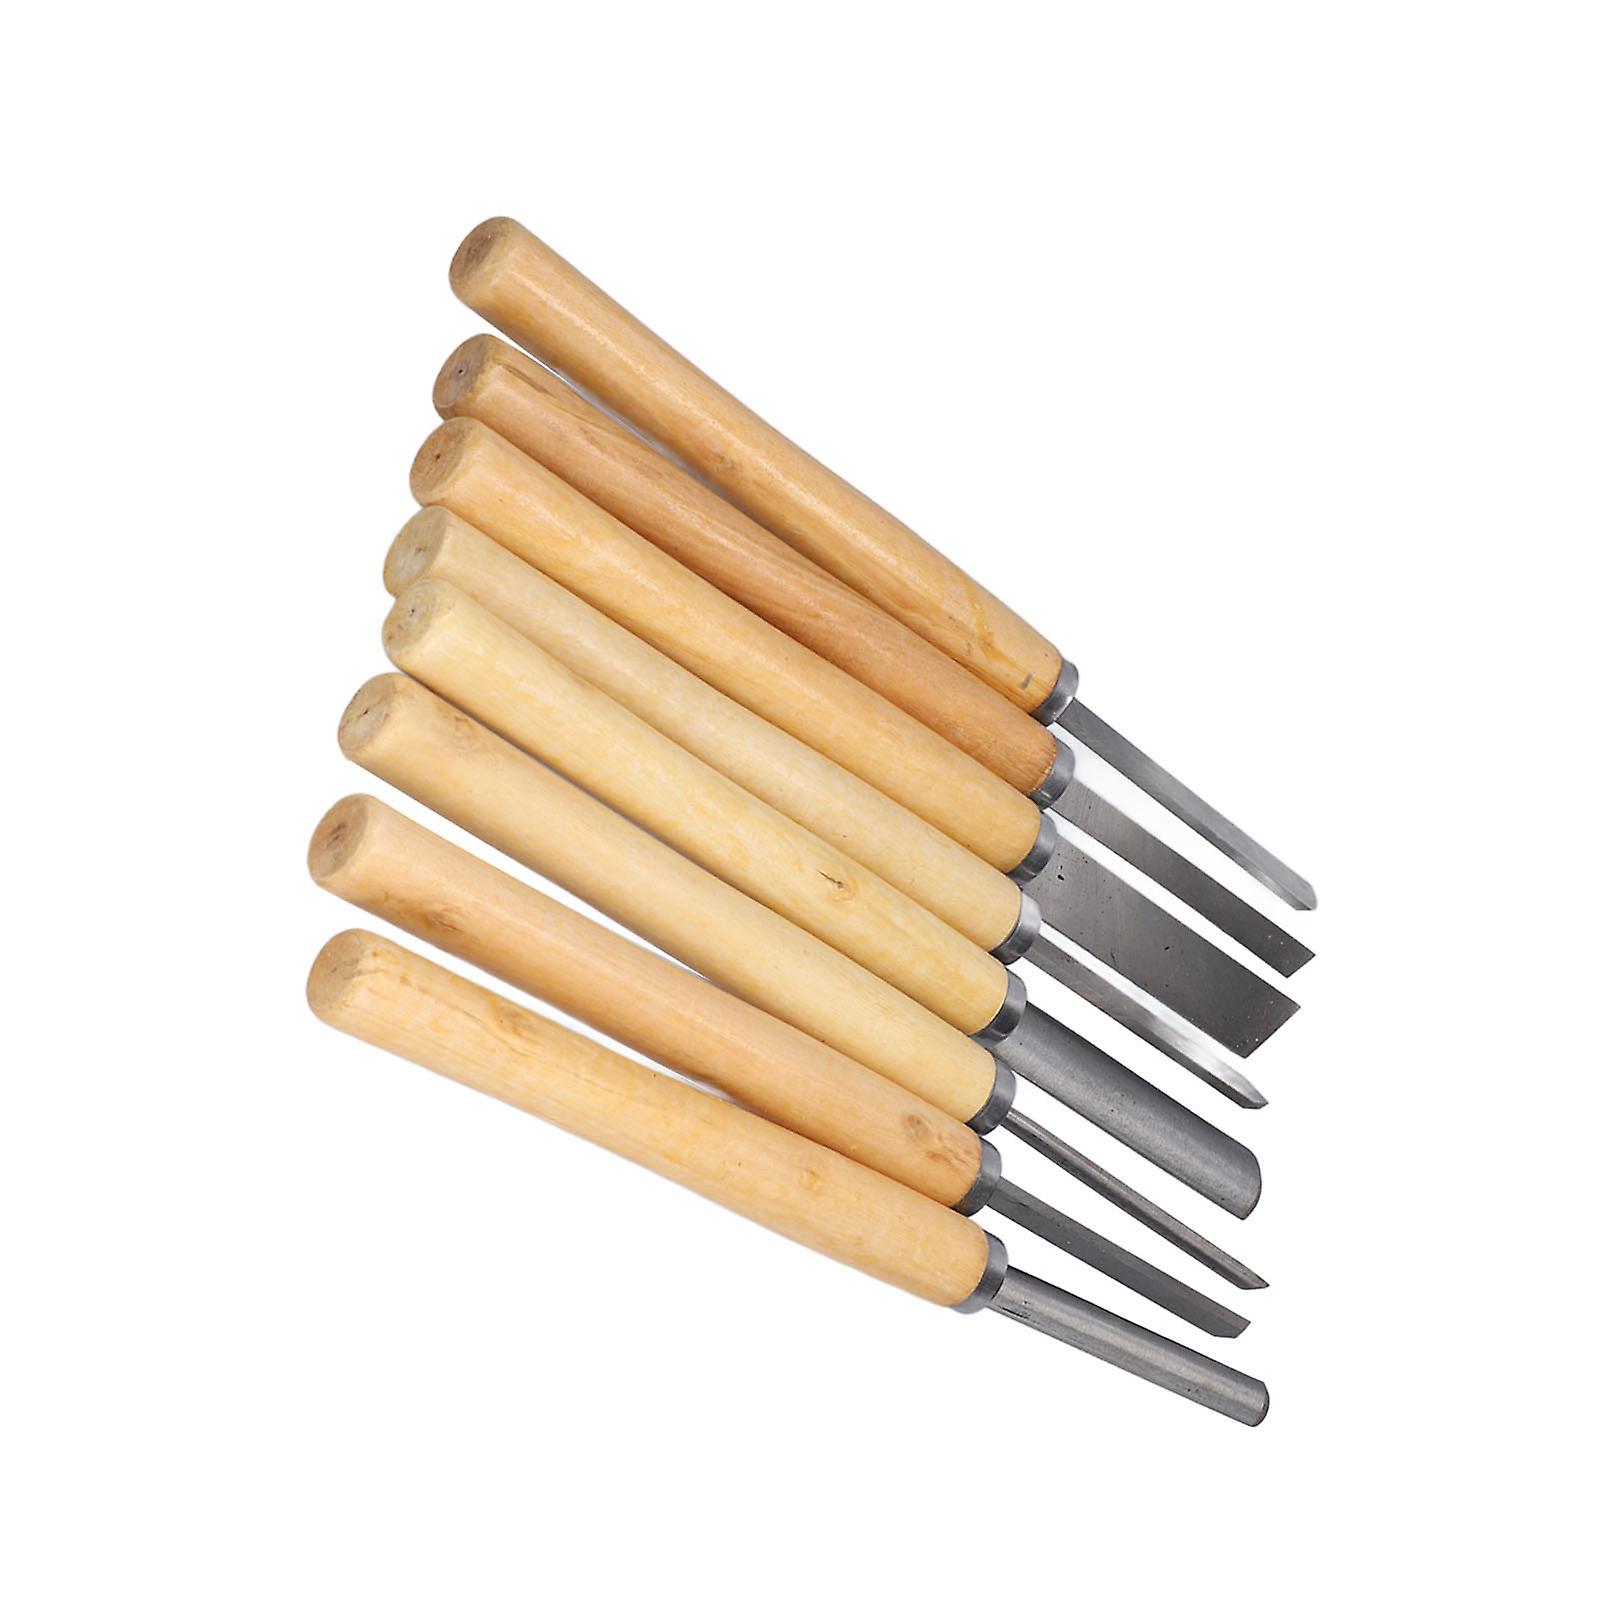 8pcs Wood Turning Chisels Hhs Groove Parting Tools Set Woodworking Carving Gouge Accessories